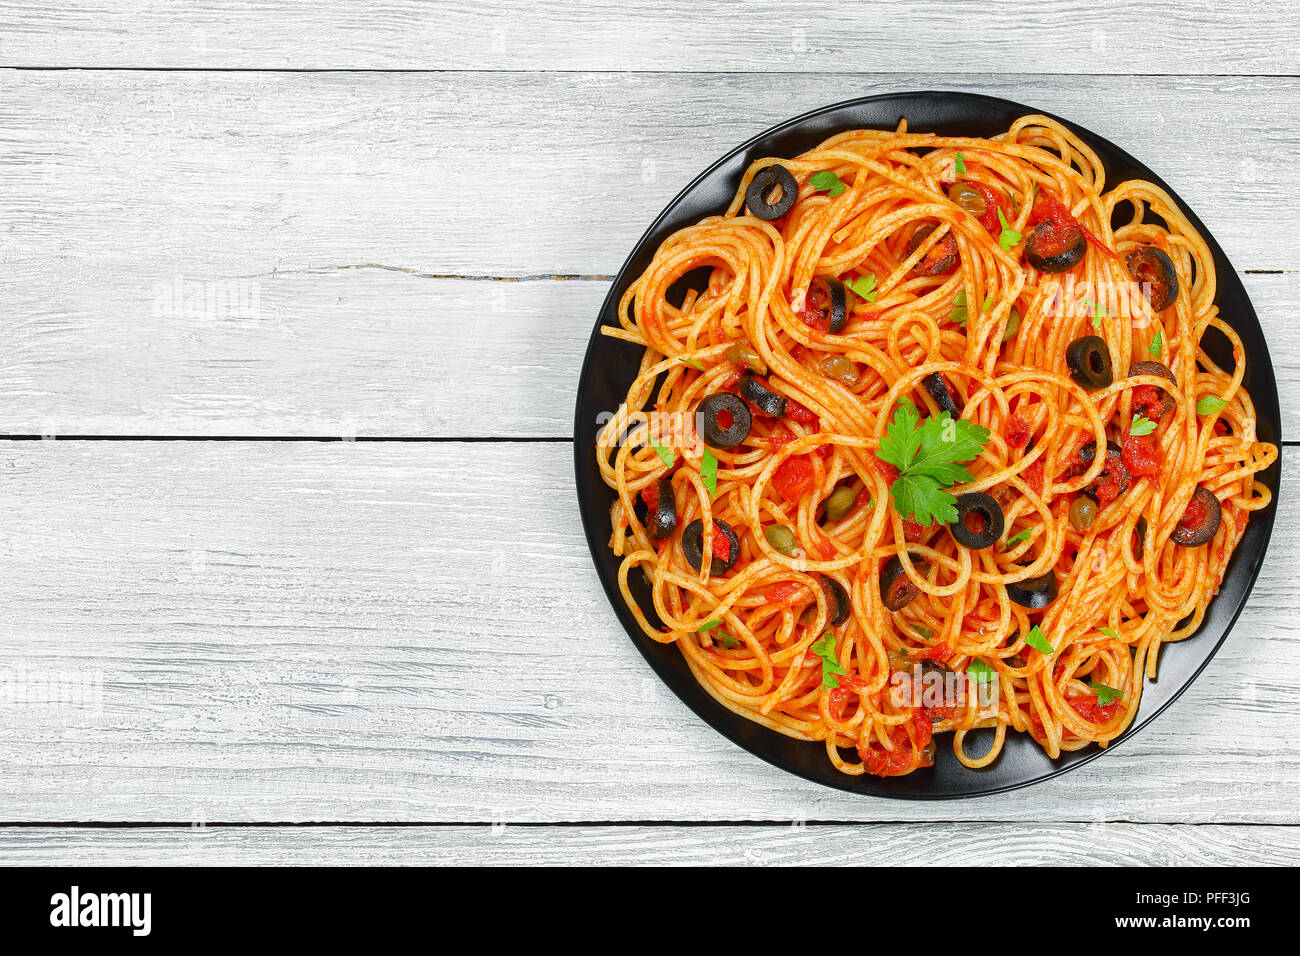 Delicious Spaghetti alla puttanesca with capers. olives, tomato sauce sprinkled with parsley on black plate on wooden table, authentic basic recipe, v Stock Photo